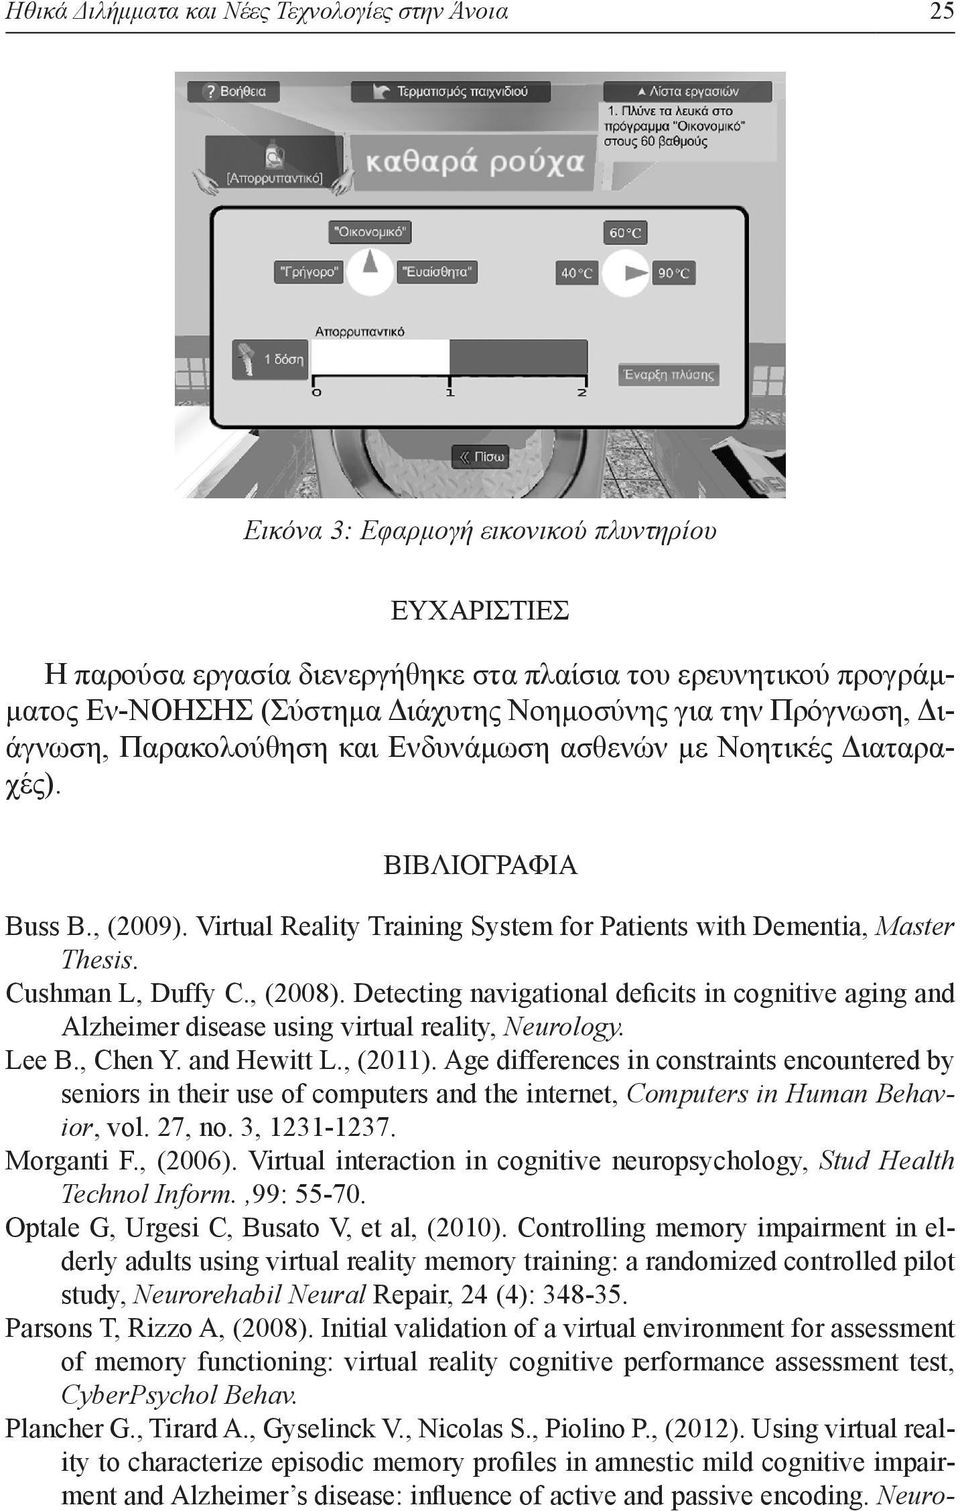 Virtual Reality Training System for Patients with Dementia, Master Thesis. Cushman L, Duffy C., (2008).